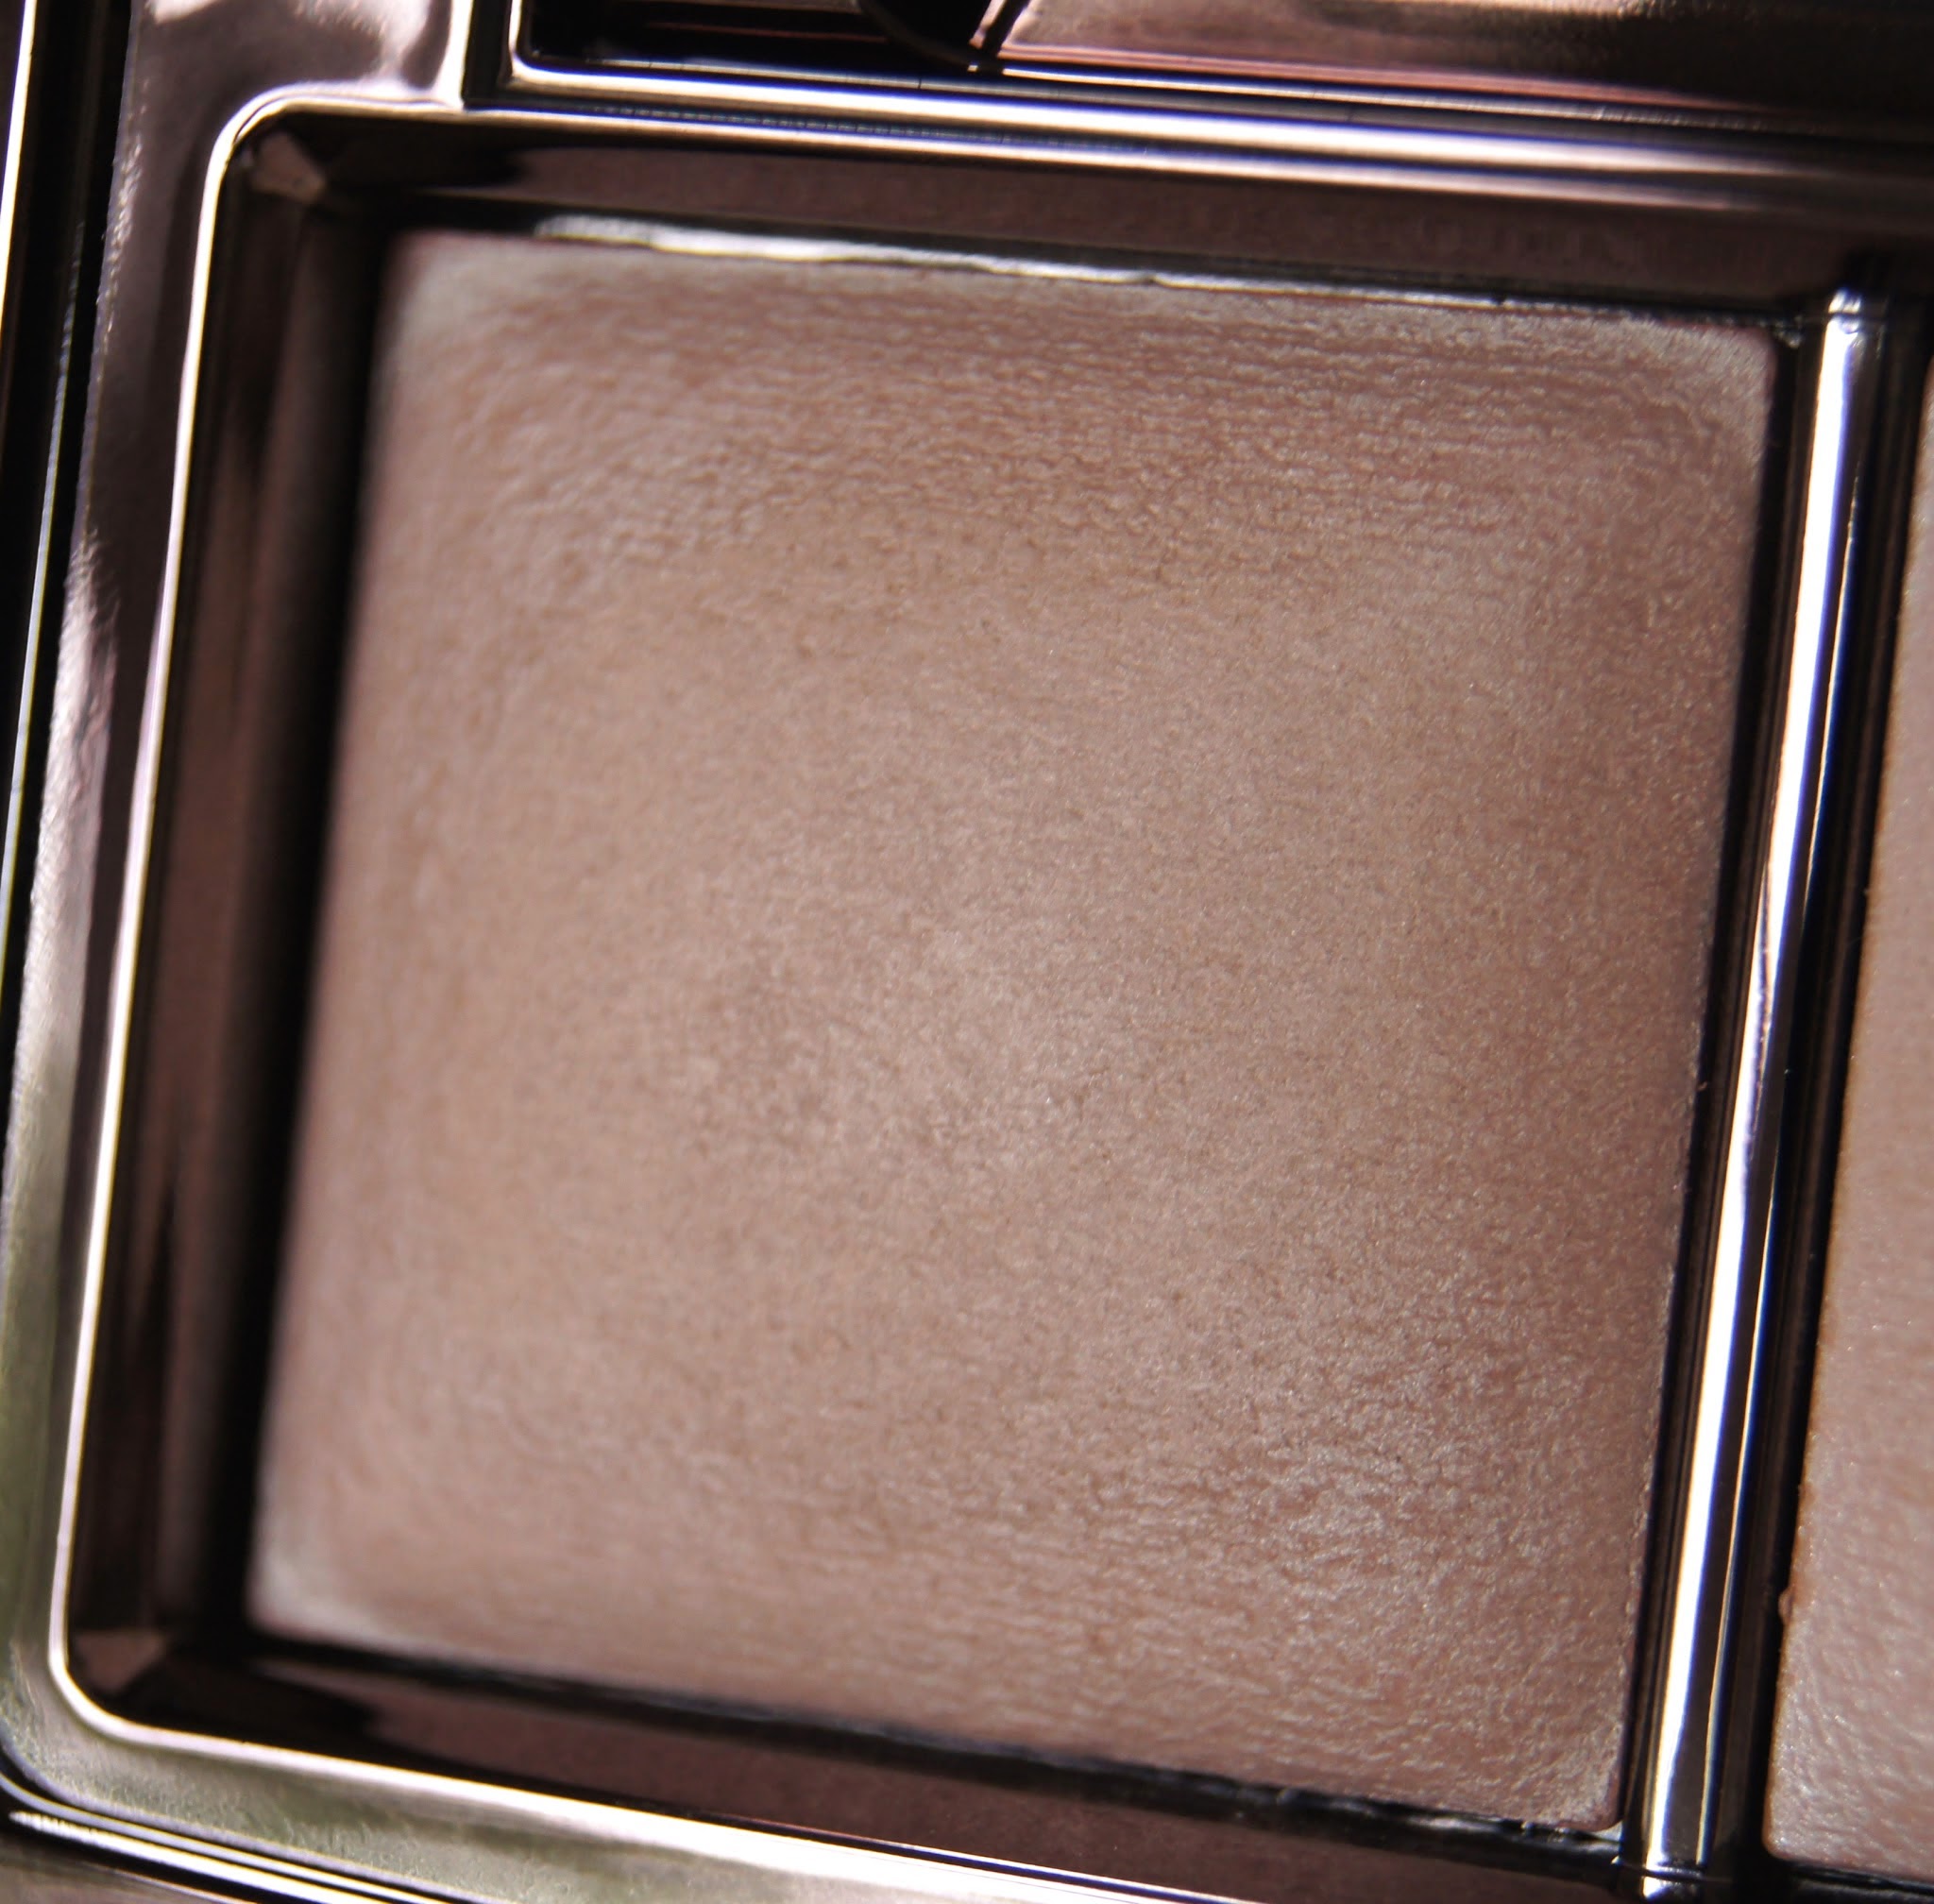 hourglass ambient lighting palette dim light review